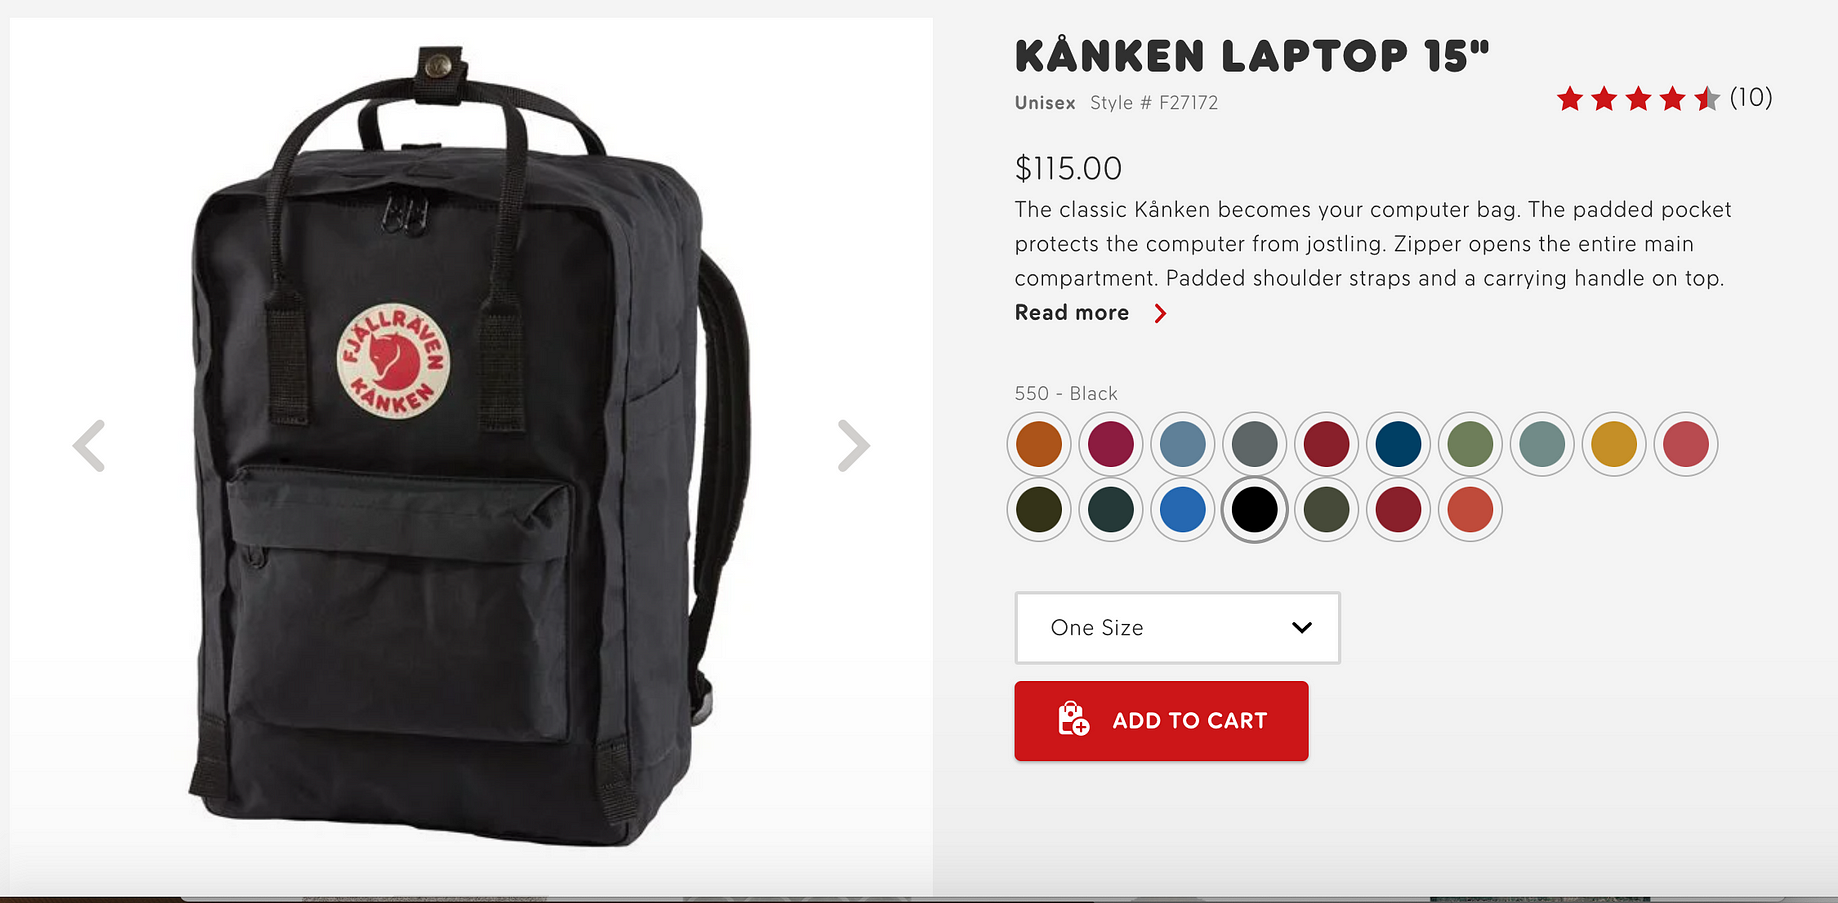 Challenged by Choosing The Color of Your Kanken Backpack? I Want to Help |  by Yulin Liu | Medium